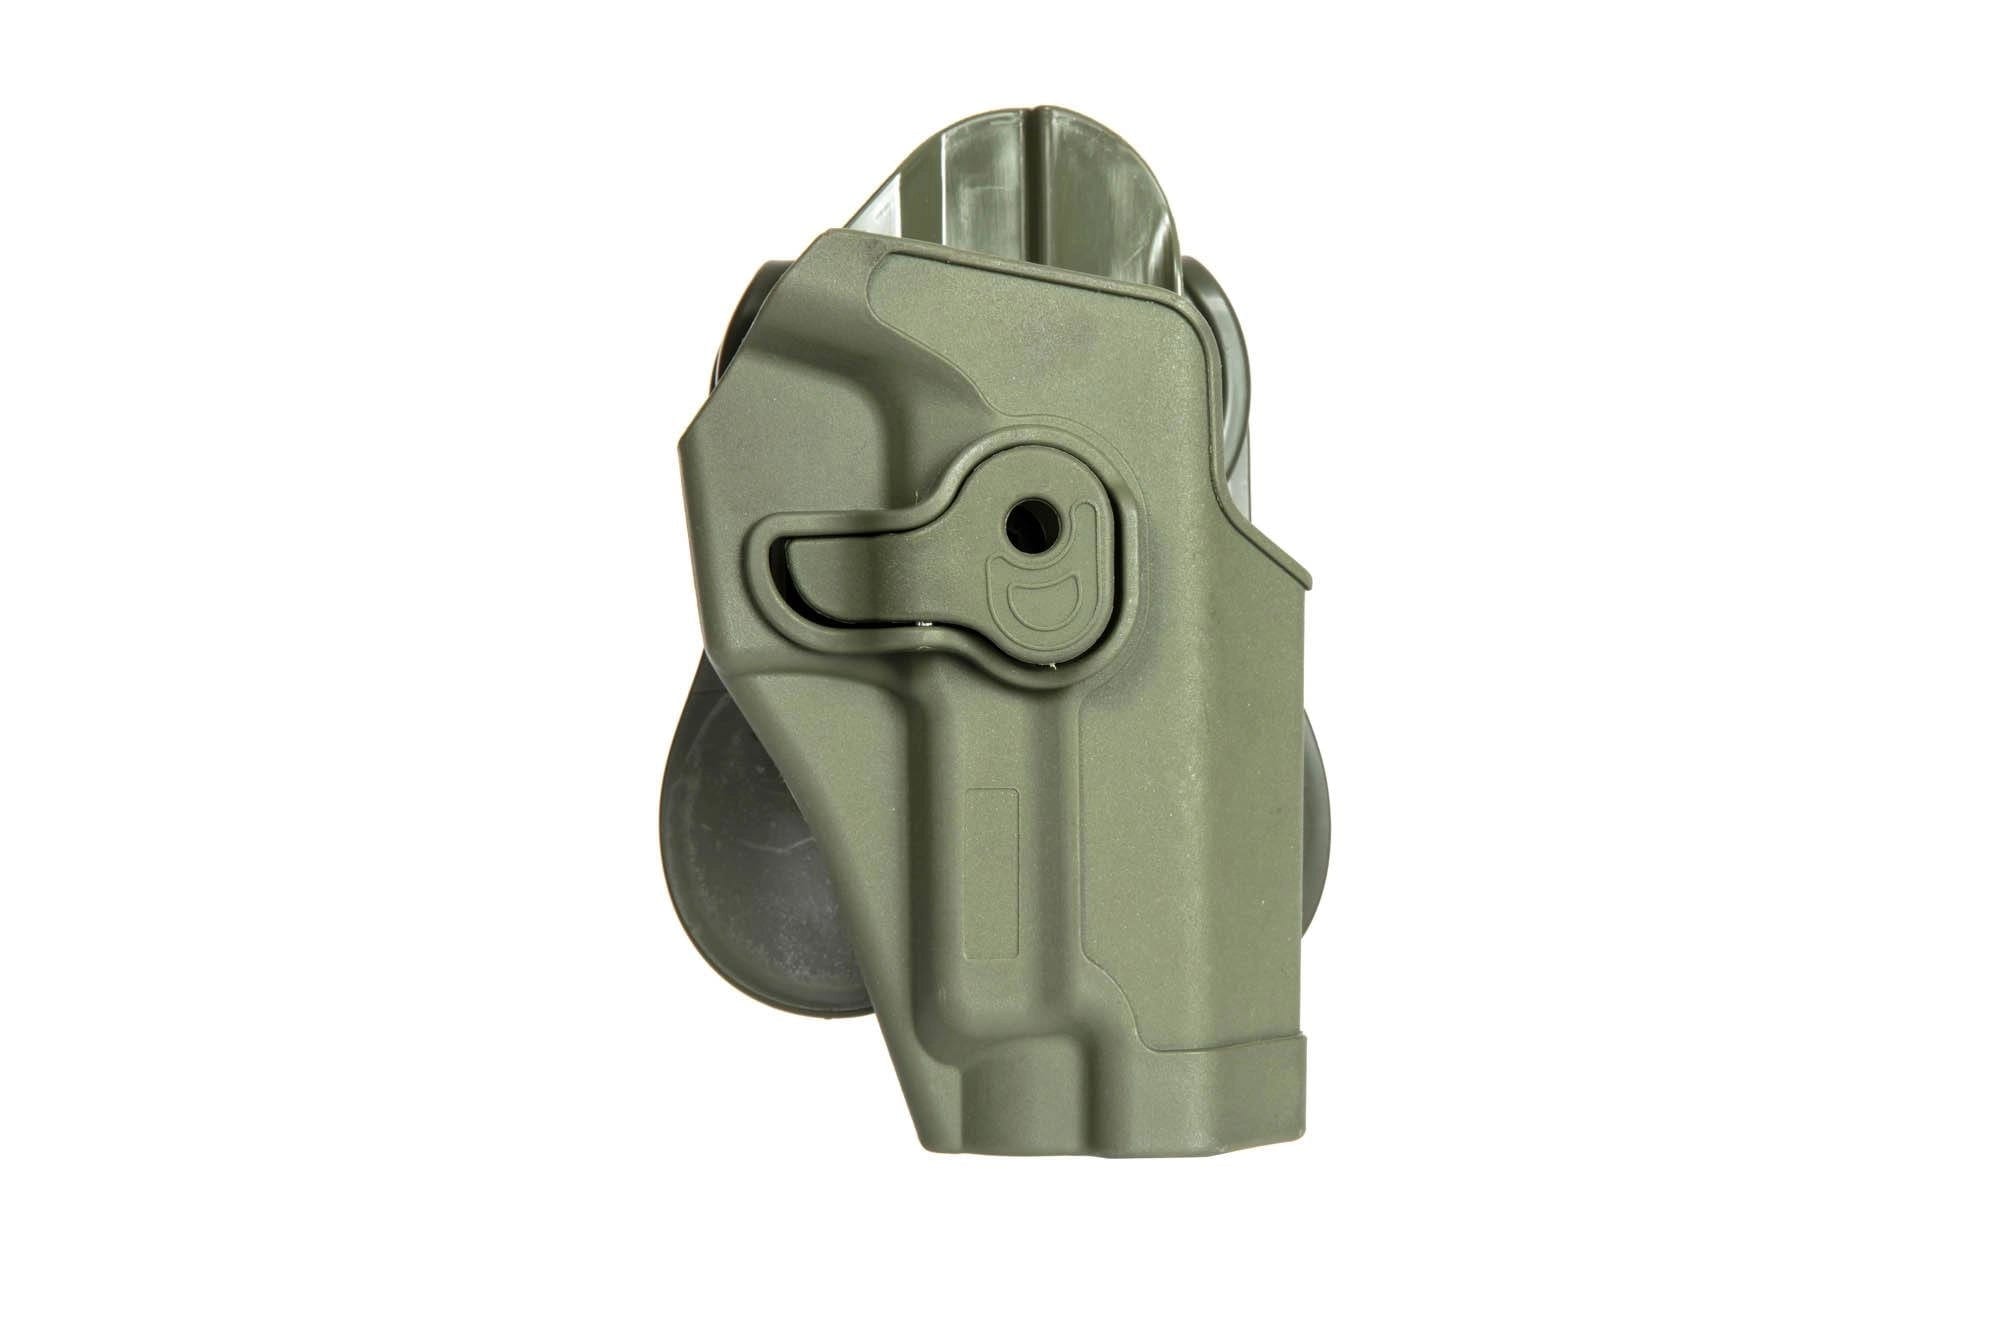 P226 type Holster - olive drab